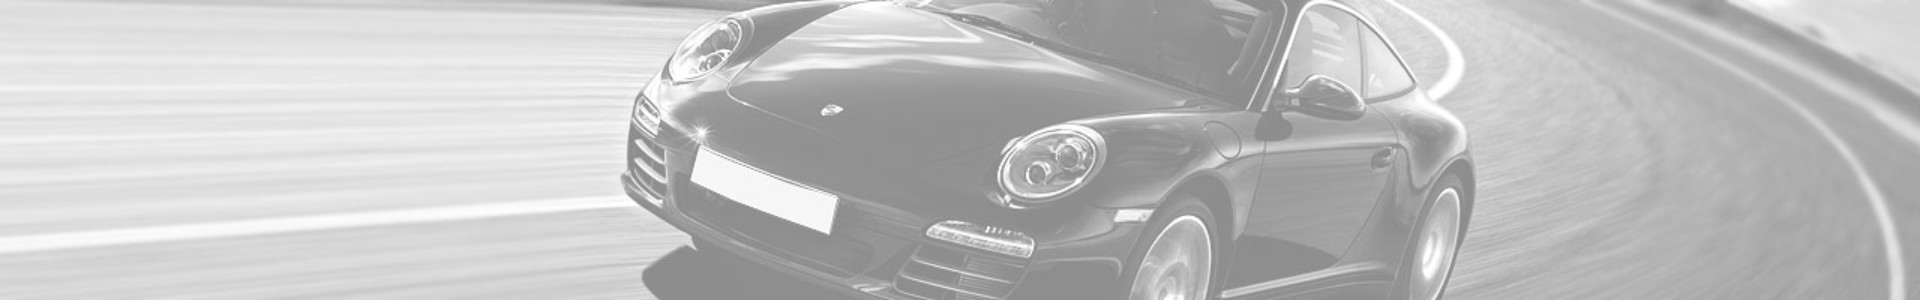 Used Porsche 911 997 Buying Guide